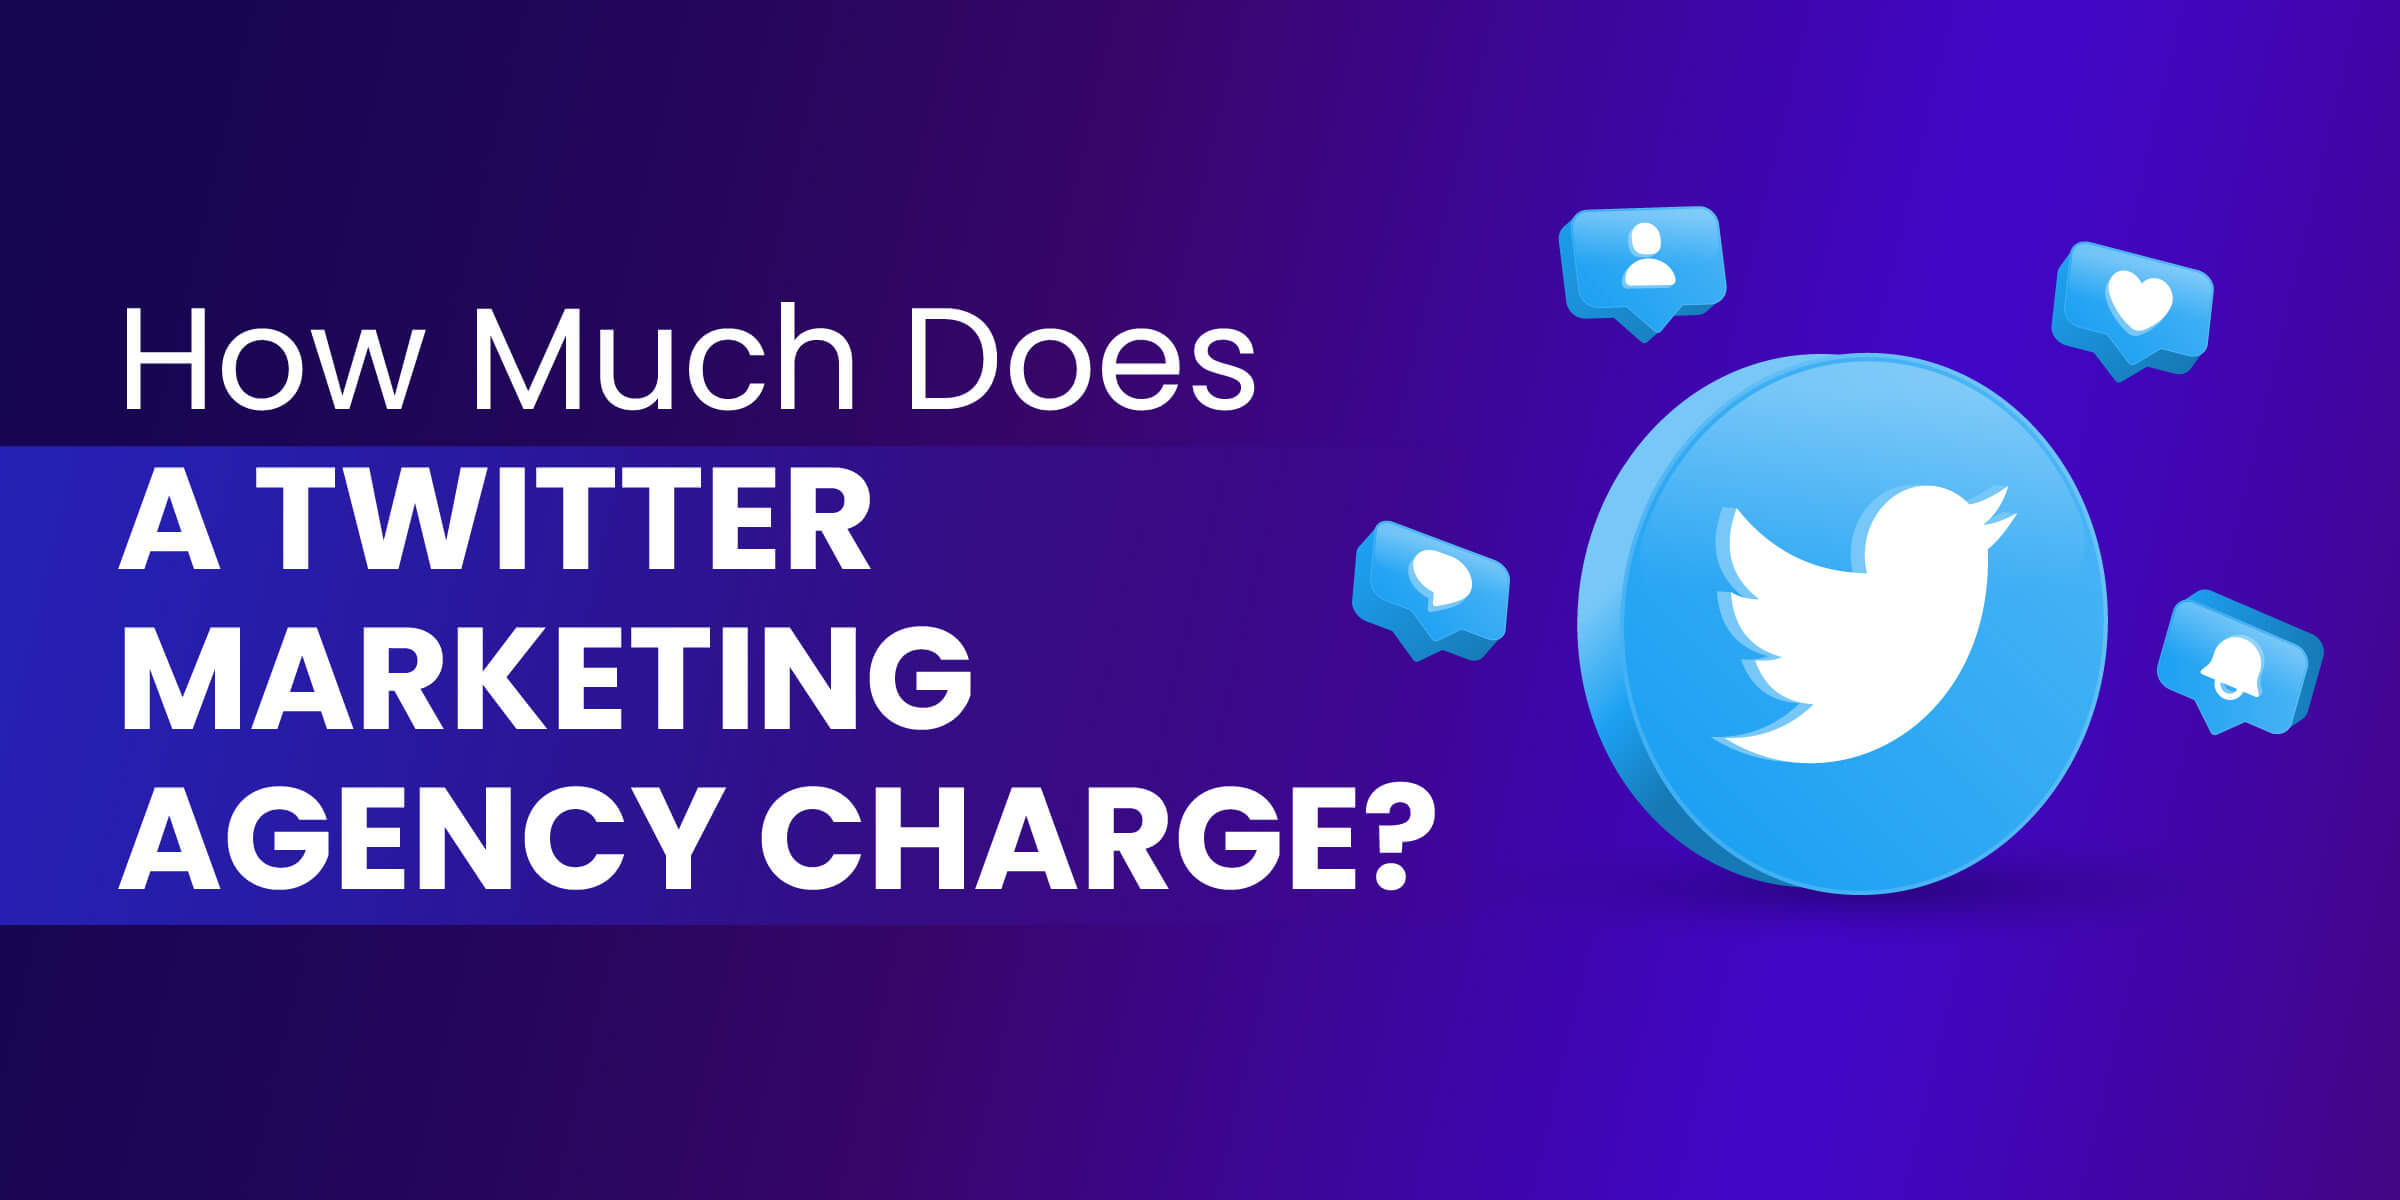 How Much Does Twitter Marketing Agency Charge